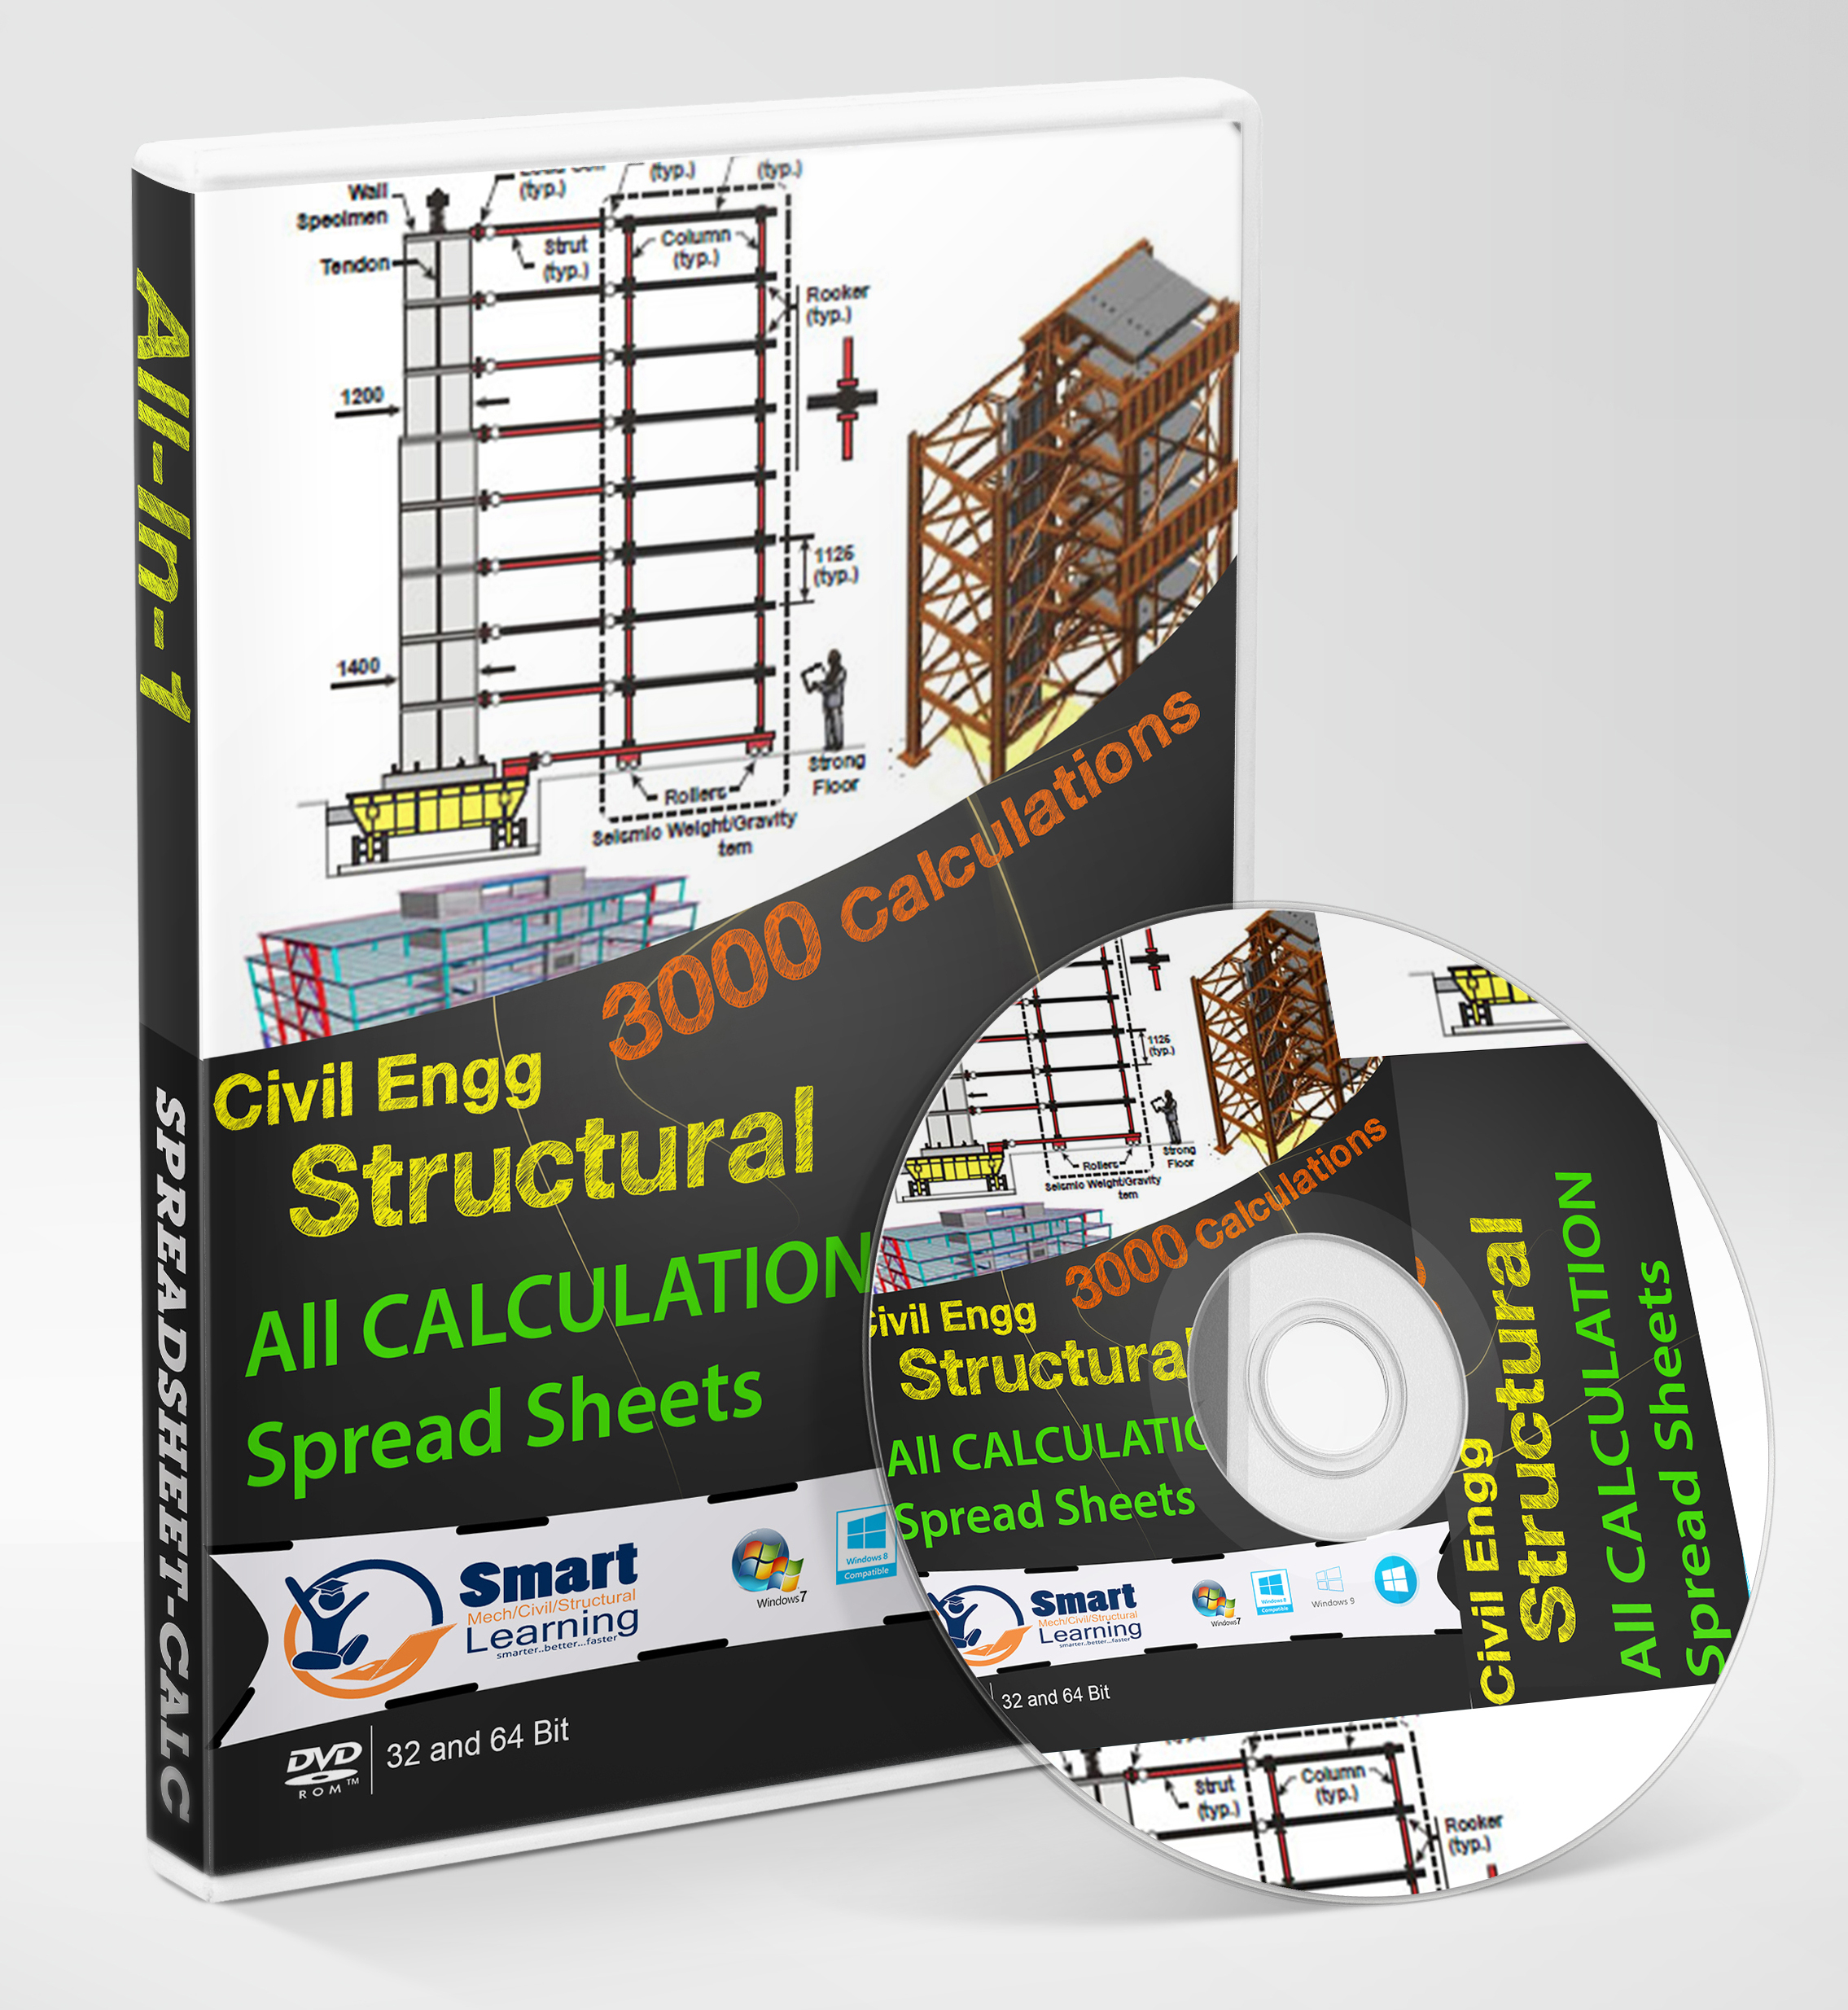 Structural Engineering Spreadsheets Within Civilstructural Design Calculation Spreadsheets